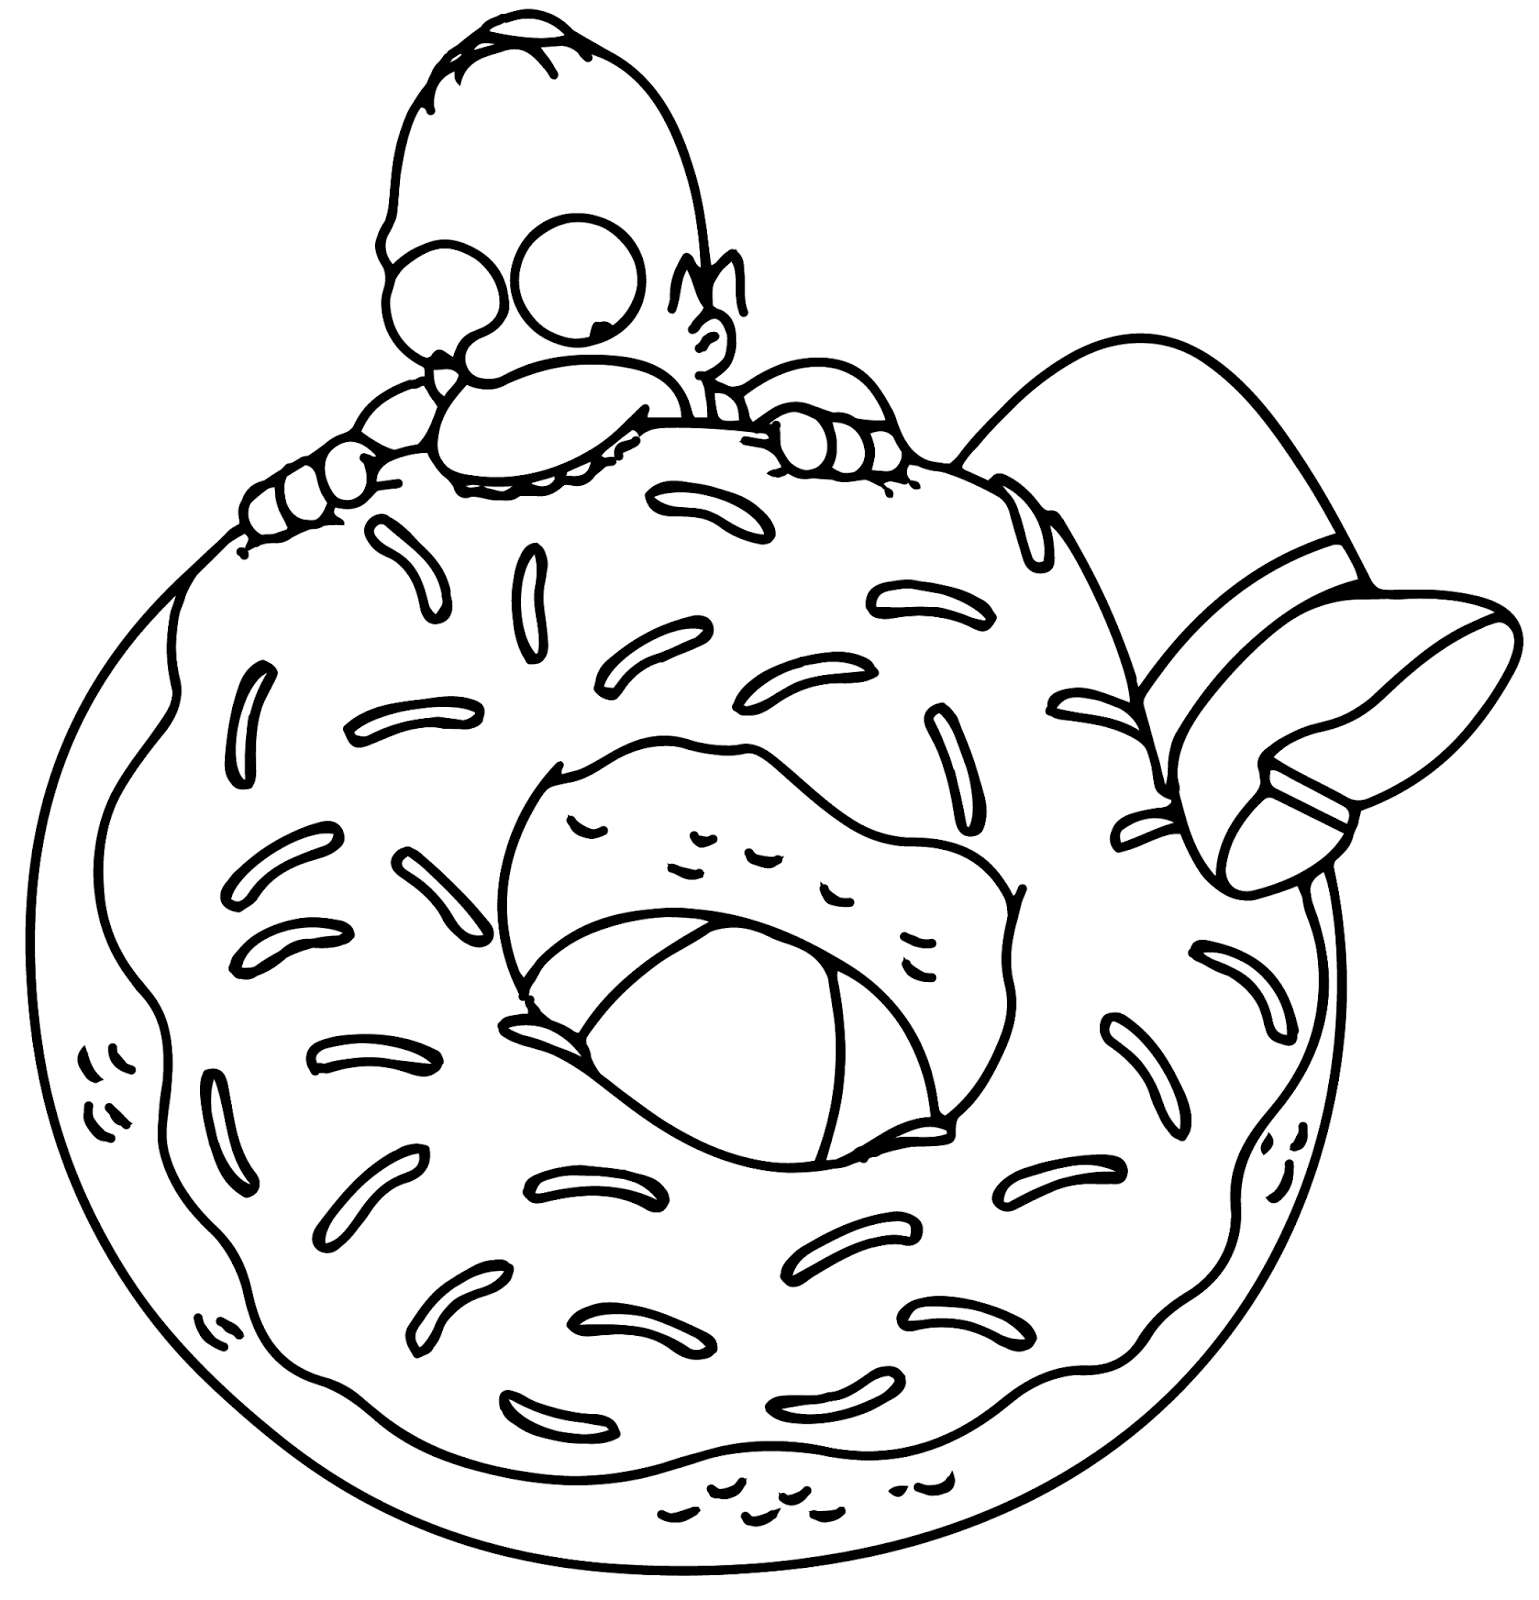  Home Simpson with Donut Coloring Pages | Print Coloring Pages